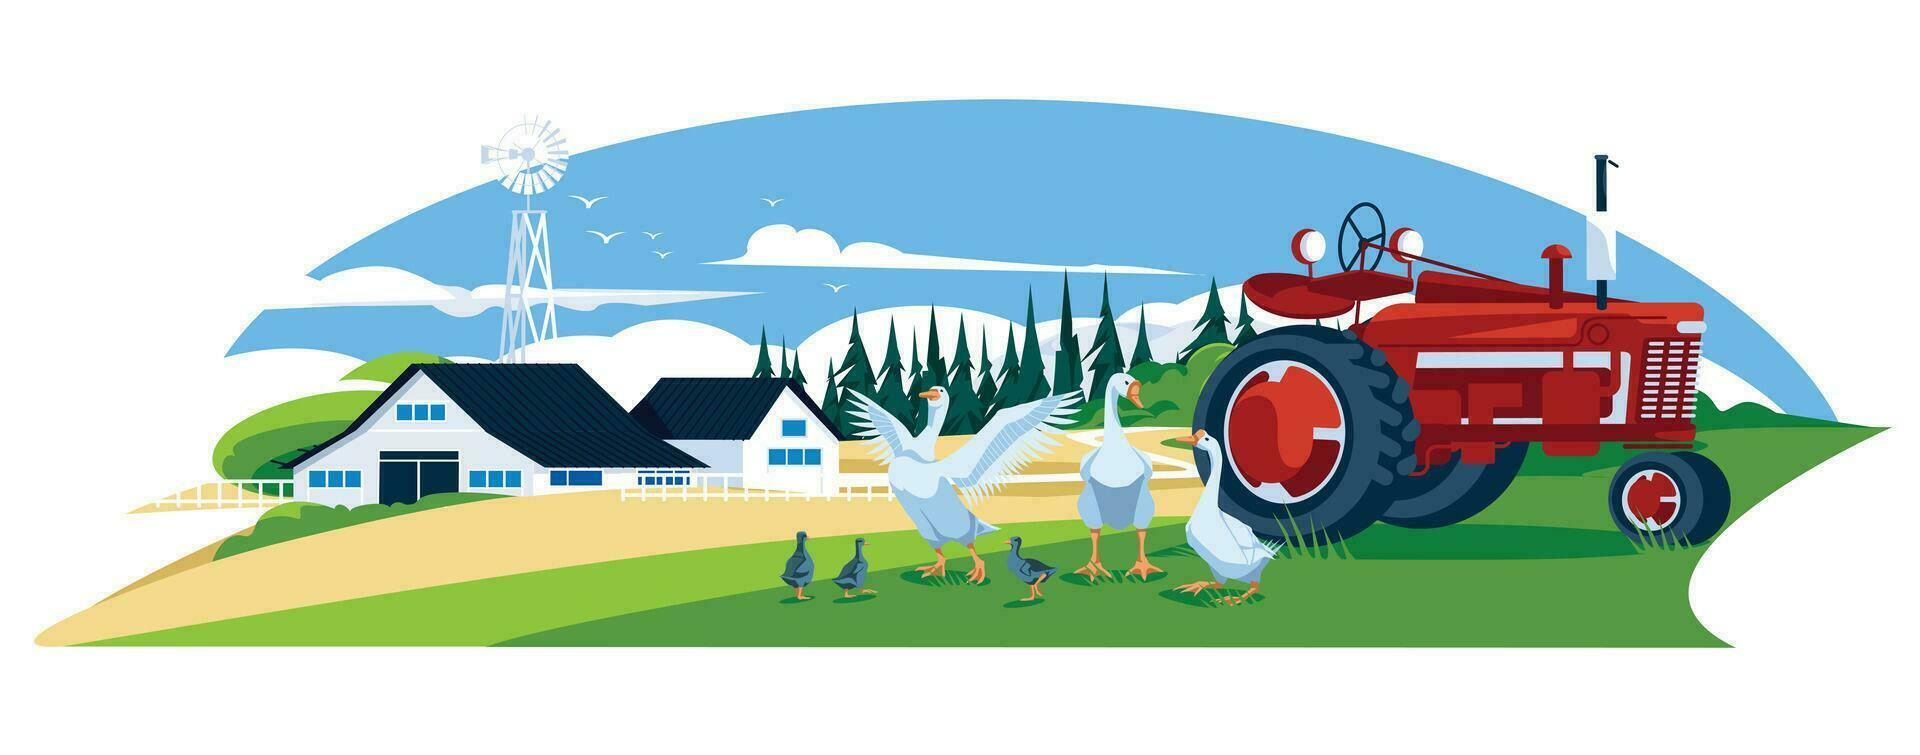 Landscape of farm land with house and geese on green meadow. Red tractor. Agriculture and farming. Vector flat illustration